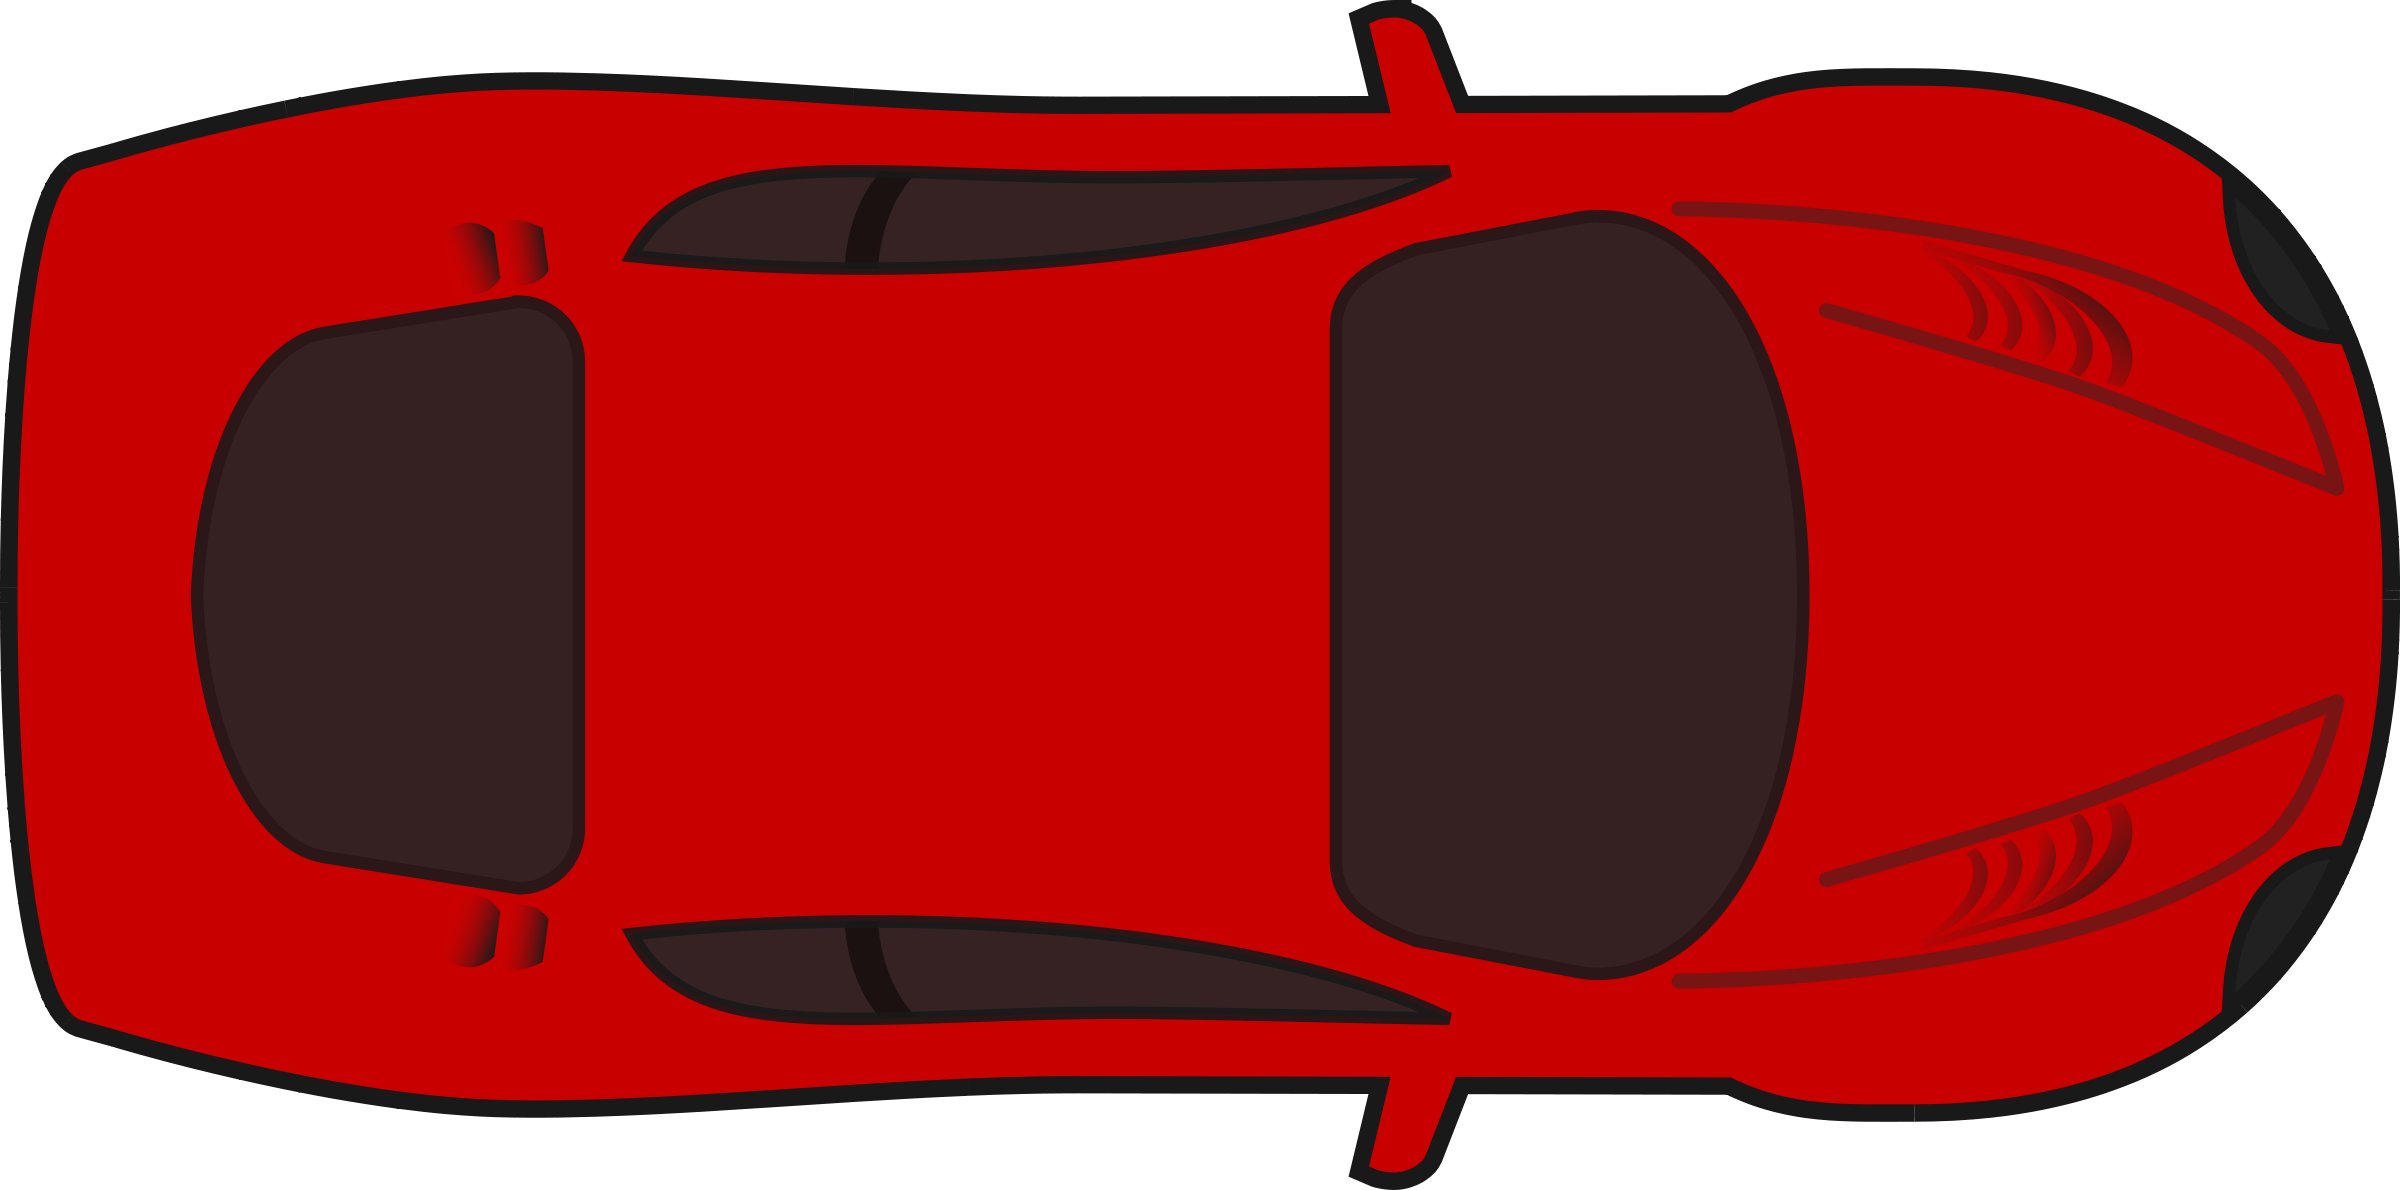 Car Top View Png Image With Transparent Background Toppng Images